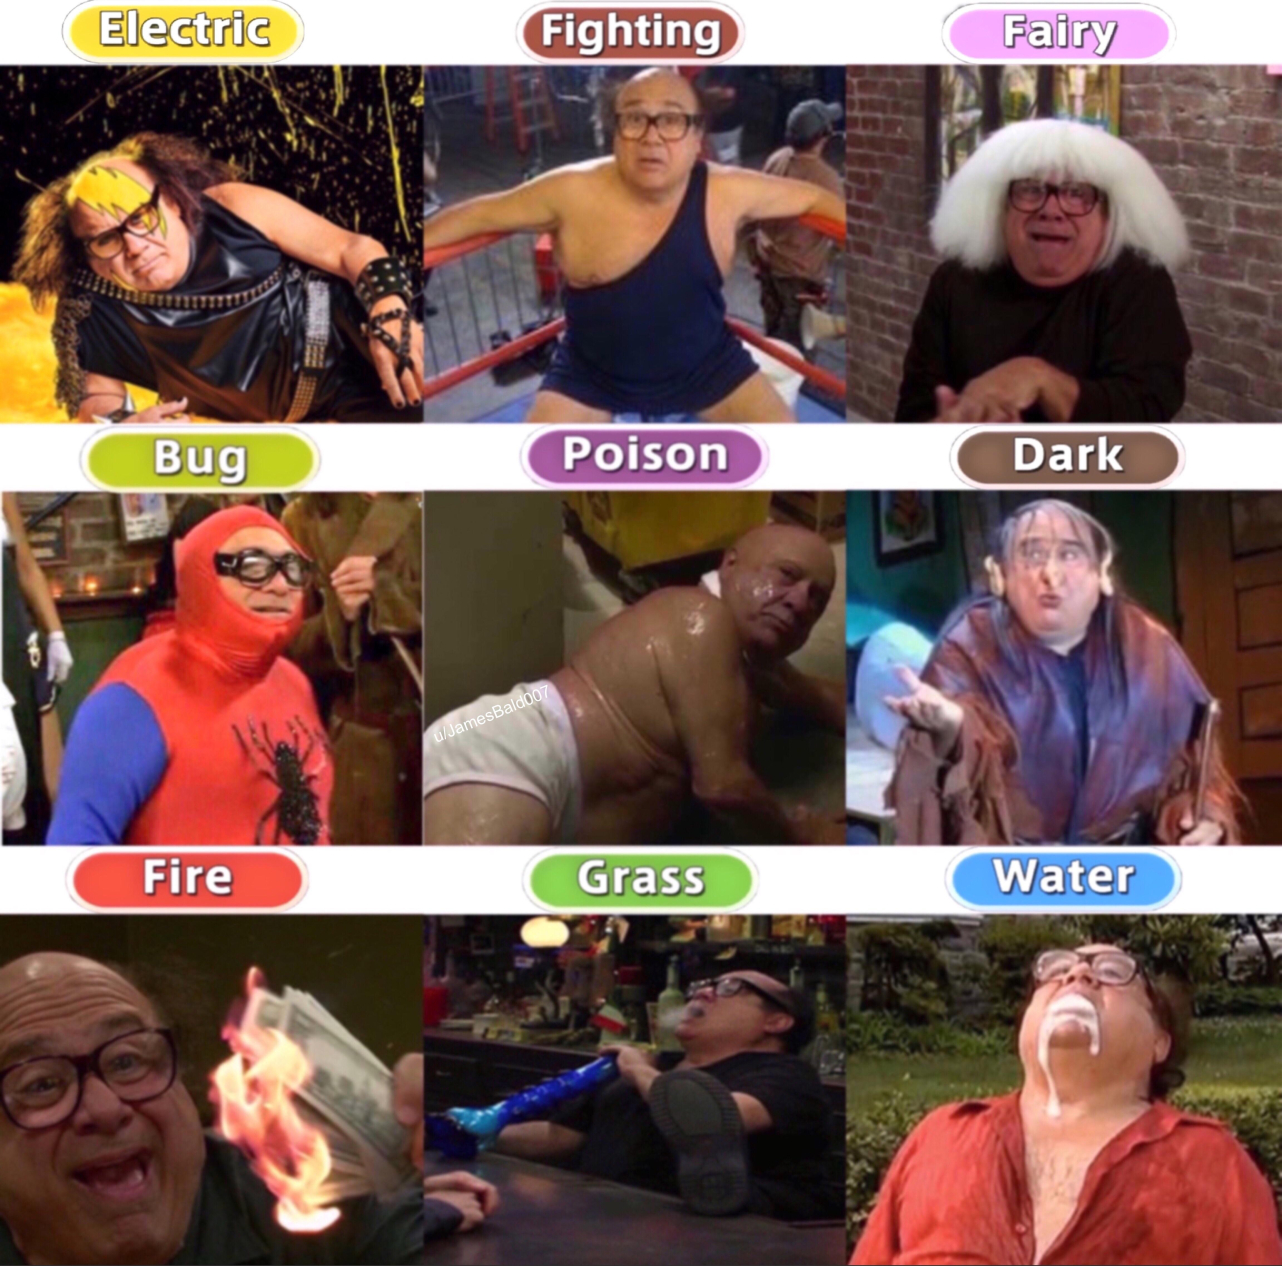 danny devito it's always sunny - Electric Fighting Fairy Bug Poison Dark Fire Grass Water